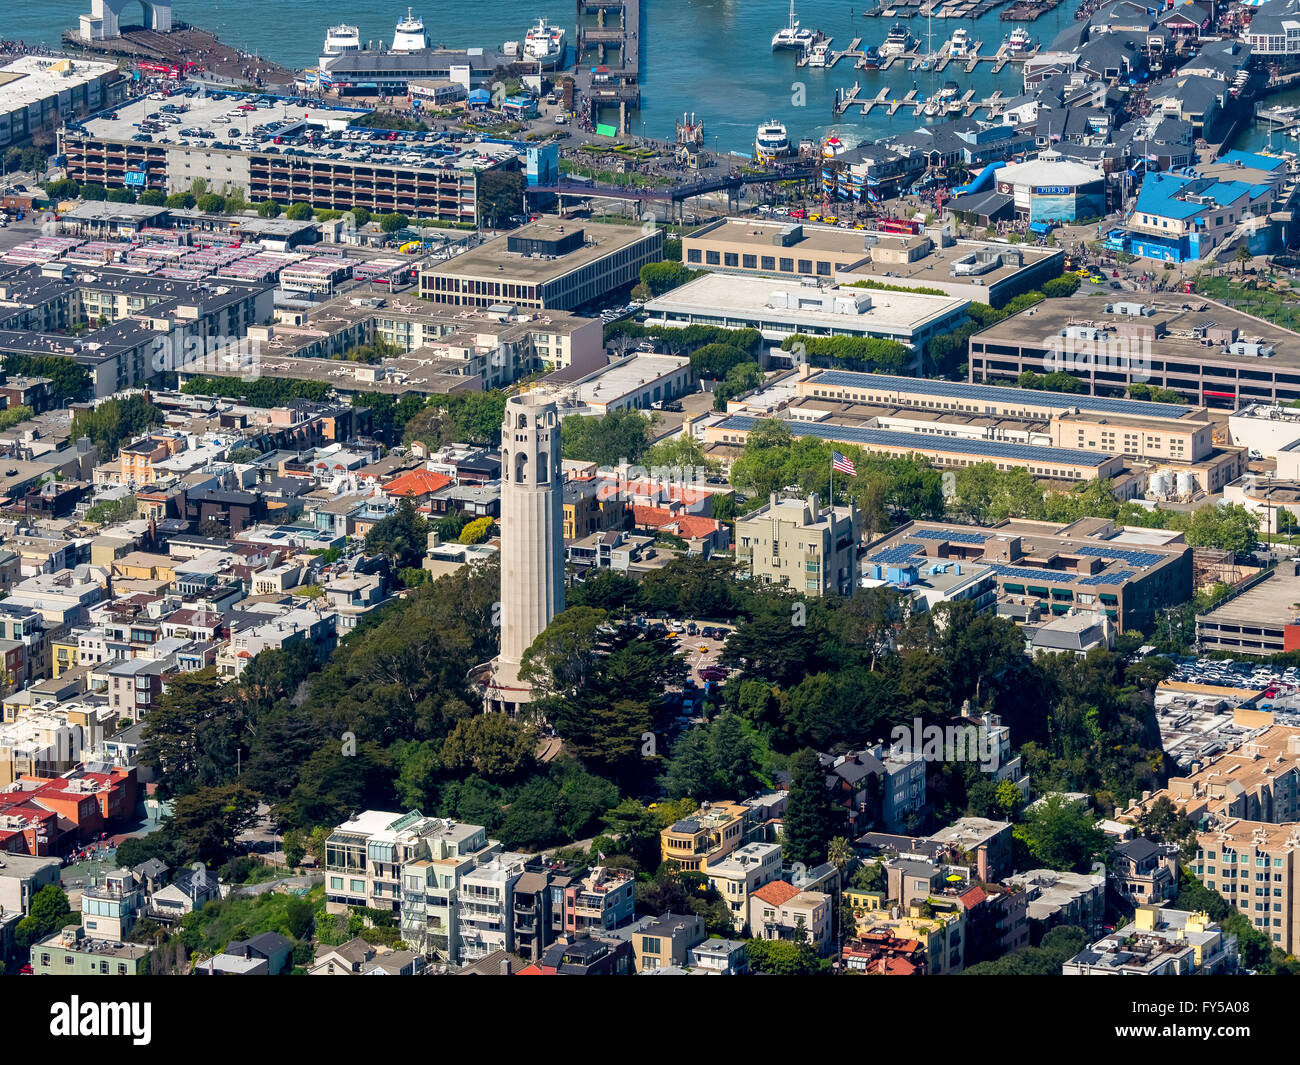 Aerial view, Coit Tower, look-out, district of North Beach, San Francisco, San Francisco Bay Area, California, USA Stock Photo